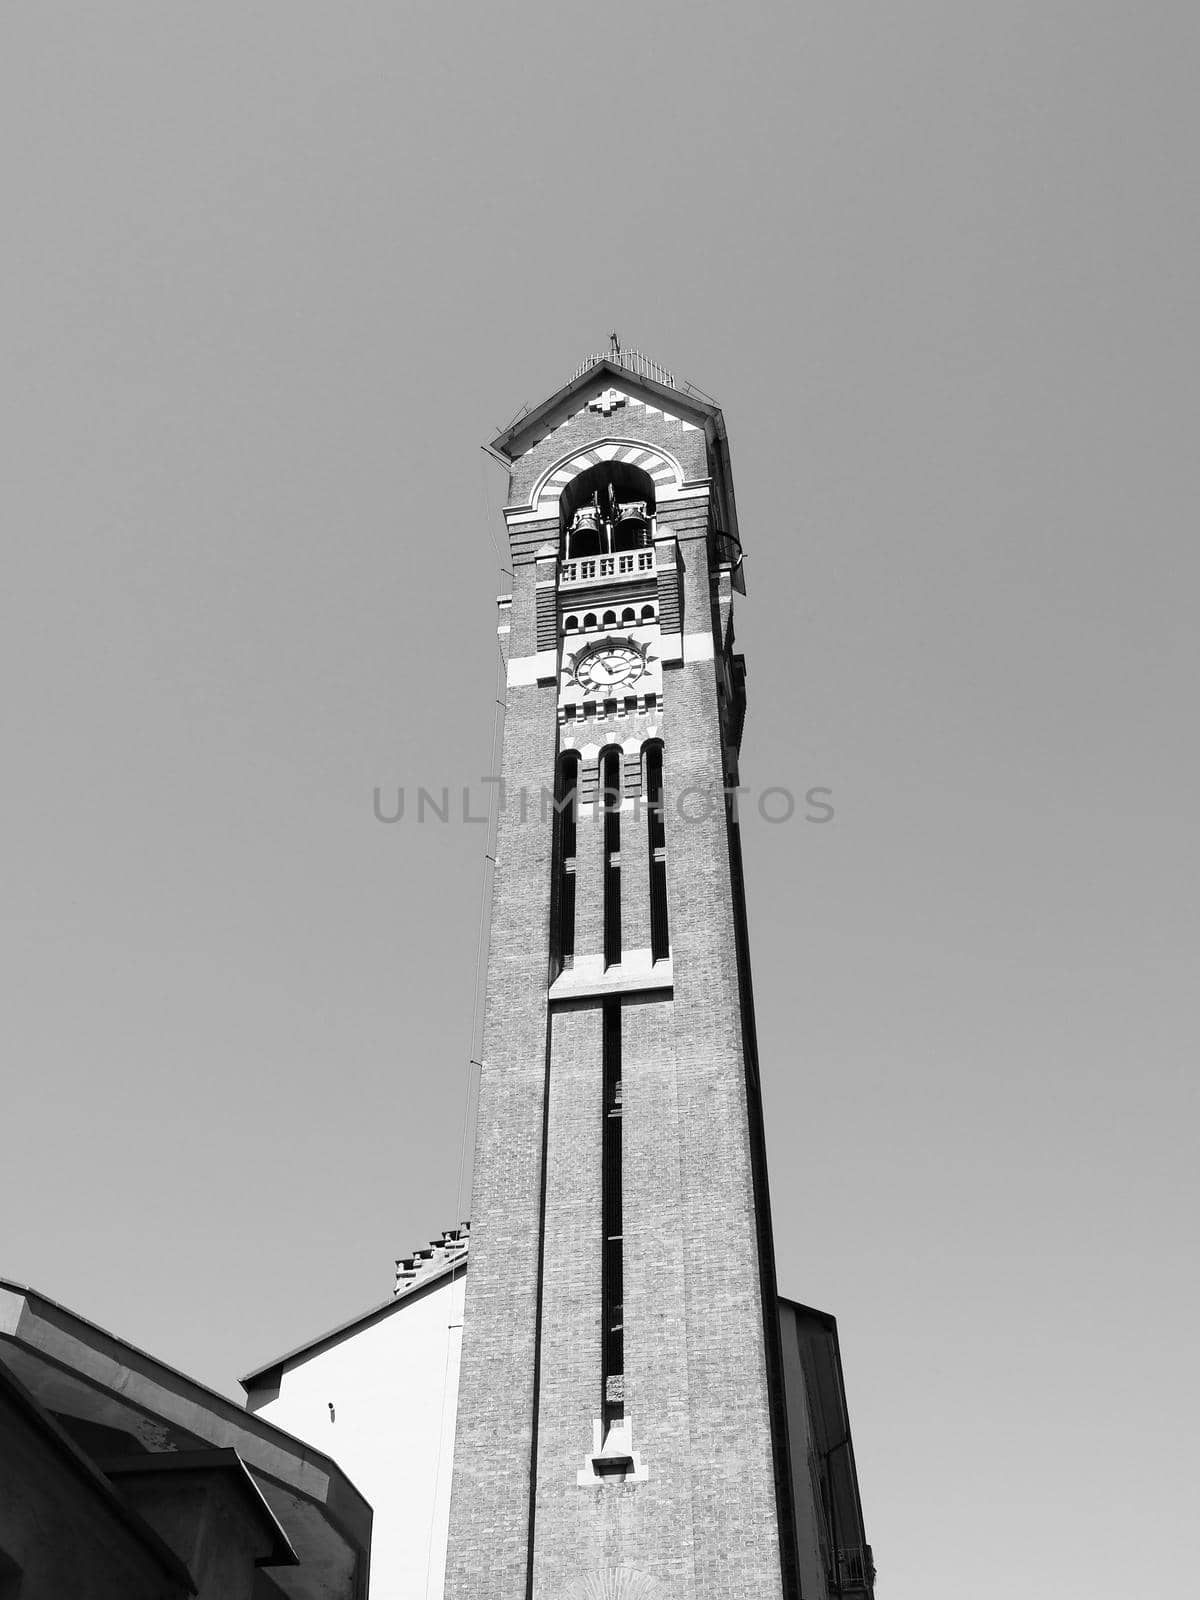 San Giuseppe church steeple in Turin in black and white by claudiodivizia